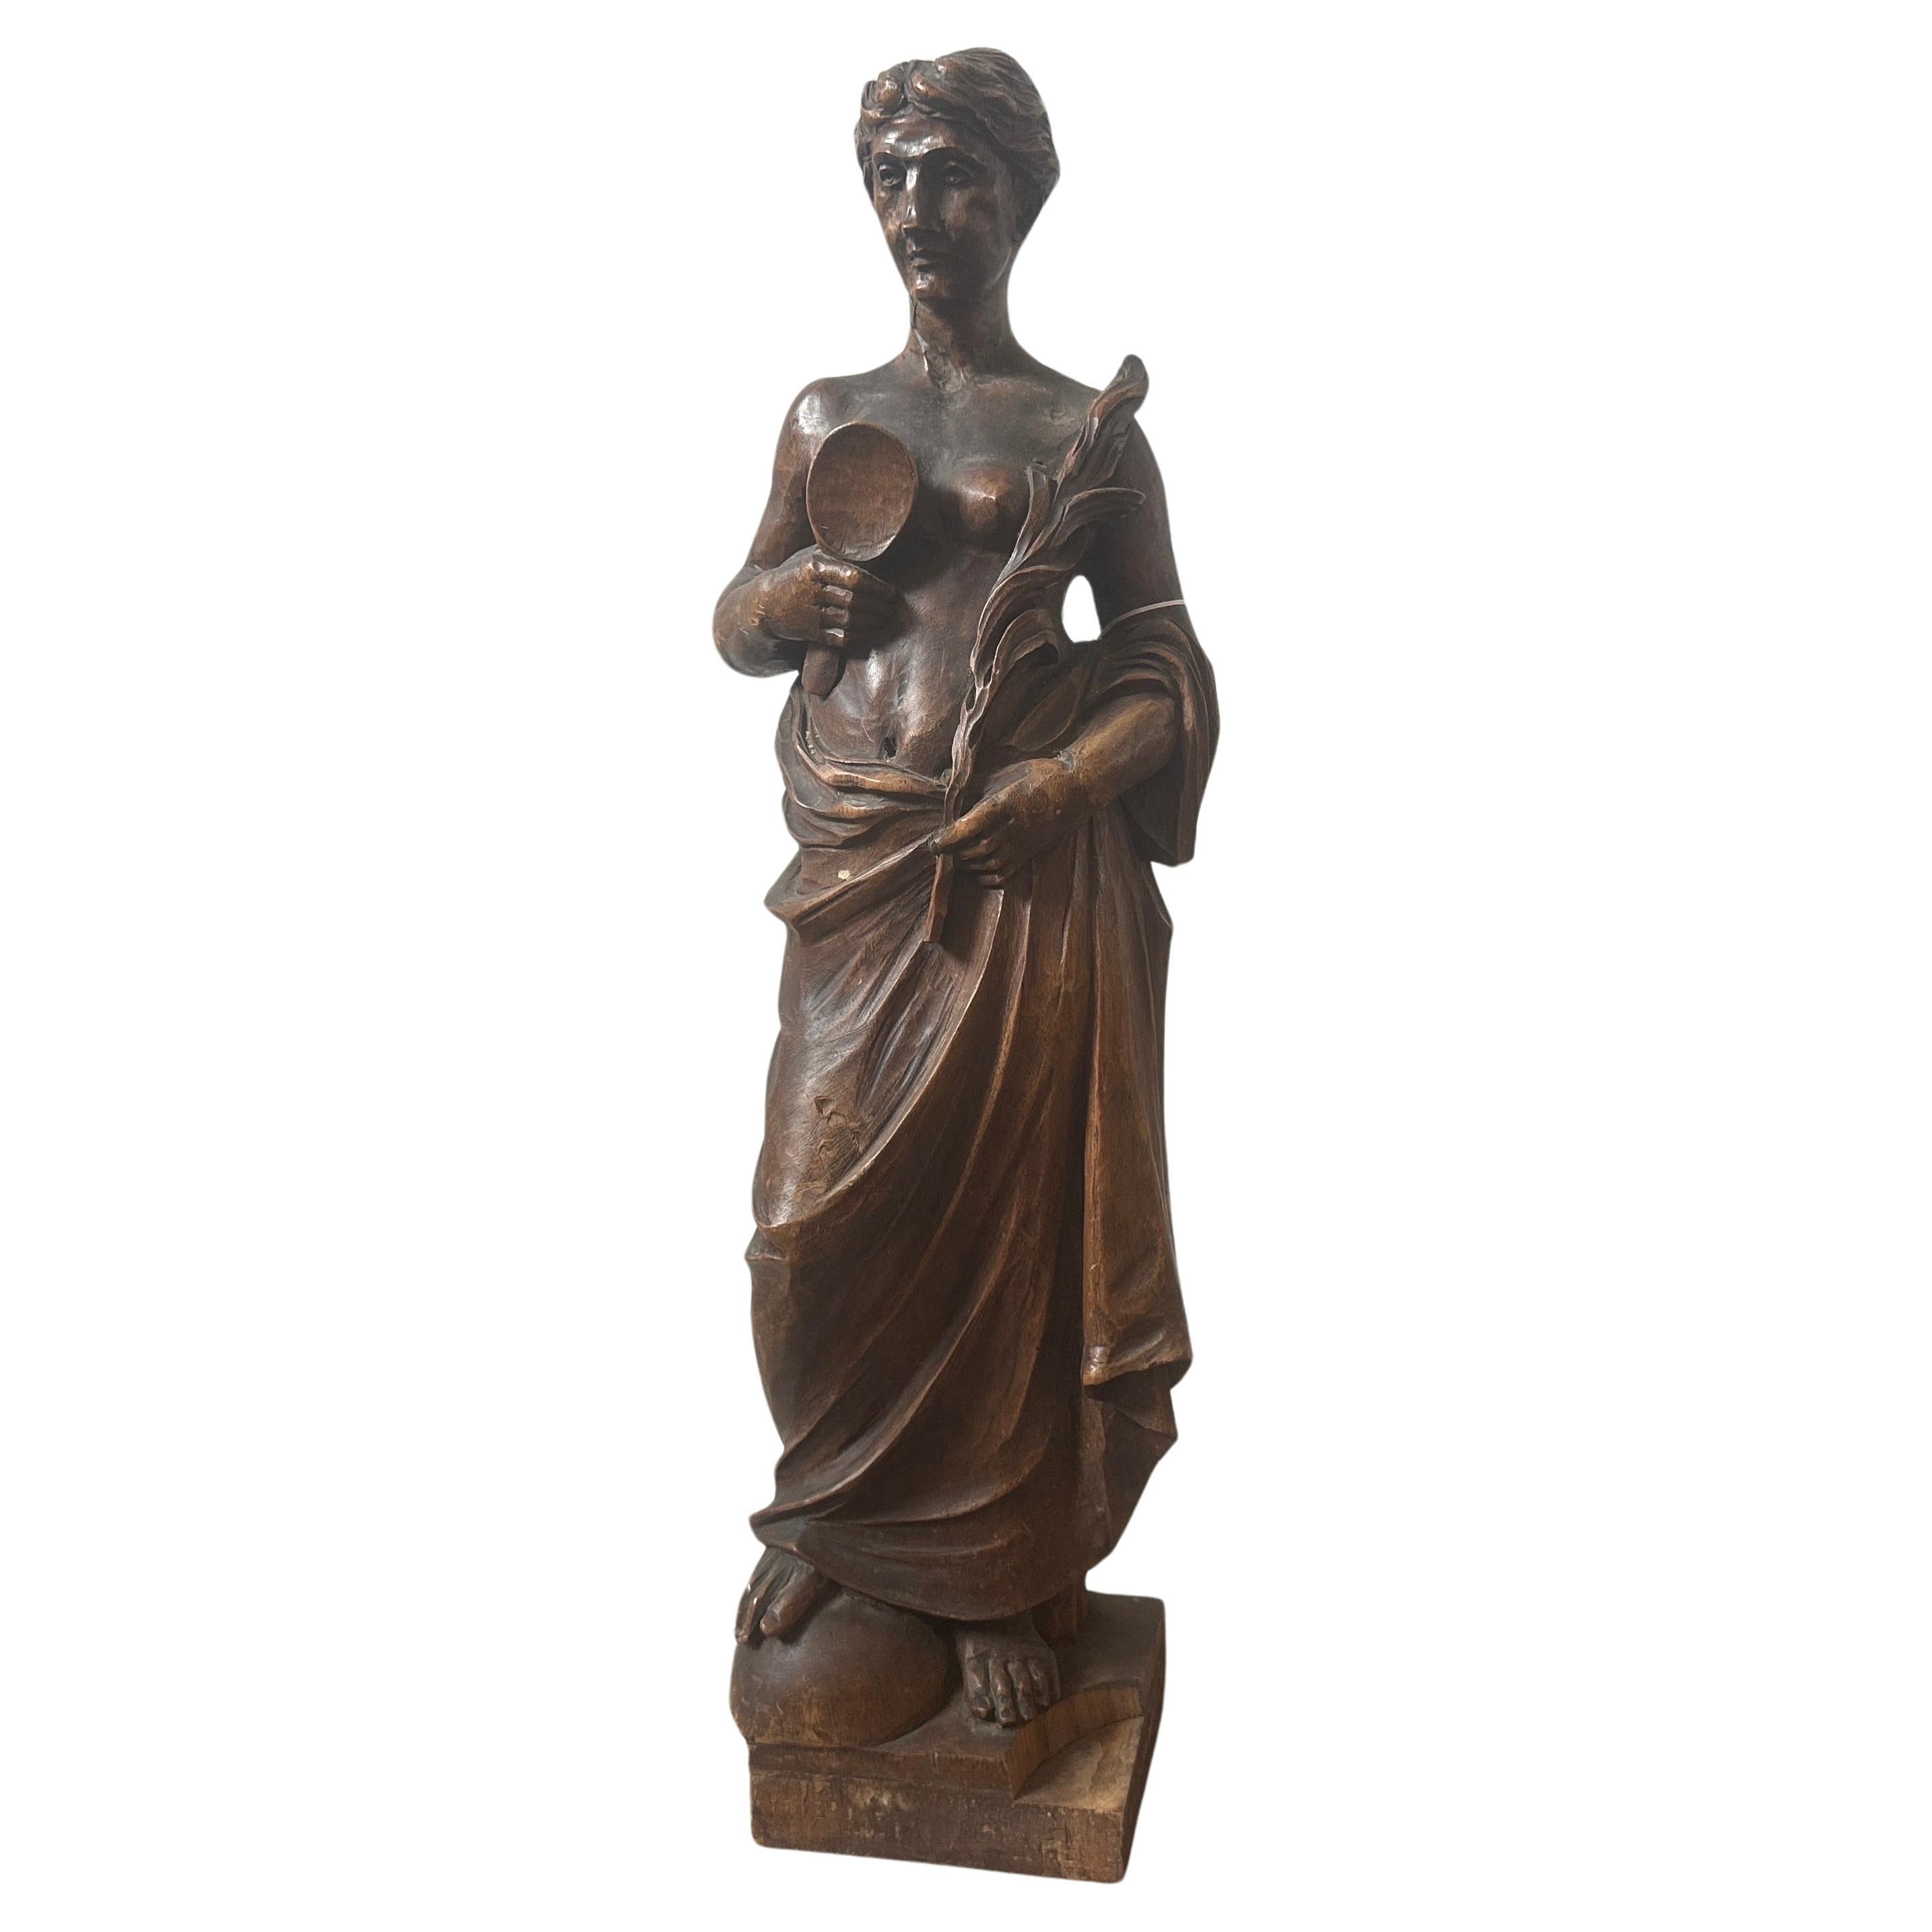 19th Century 1850s Neoclassical Hand-Carved Walnut Italian Sculpture of a Roman Bather For Sale